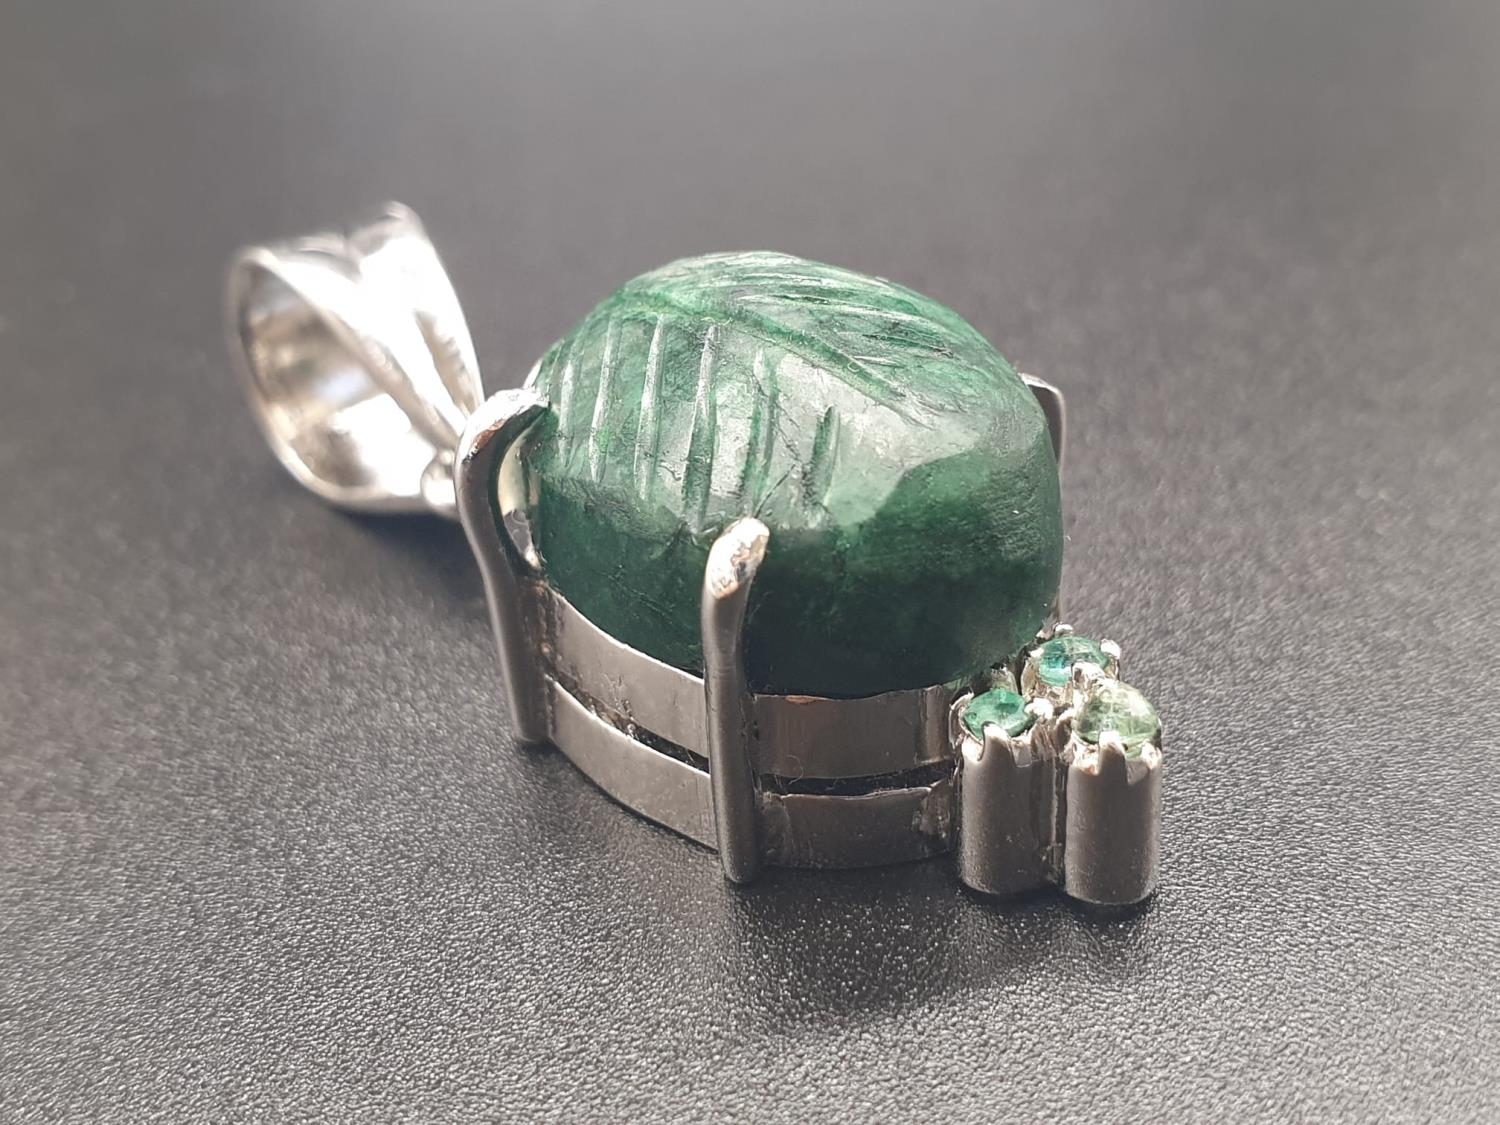 Carved Emerald Oval Pendant set In Sterling Silver, weight 10.65g and 5cm drop approx - Image 2 of 4